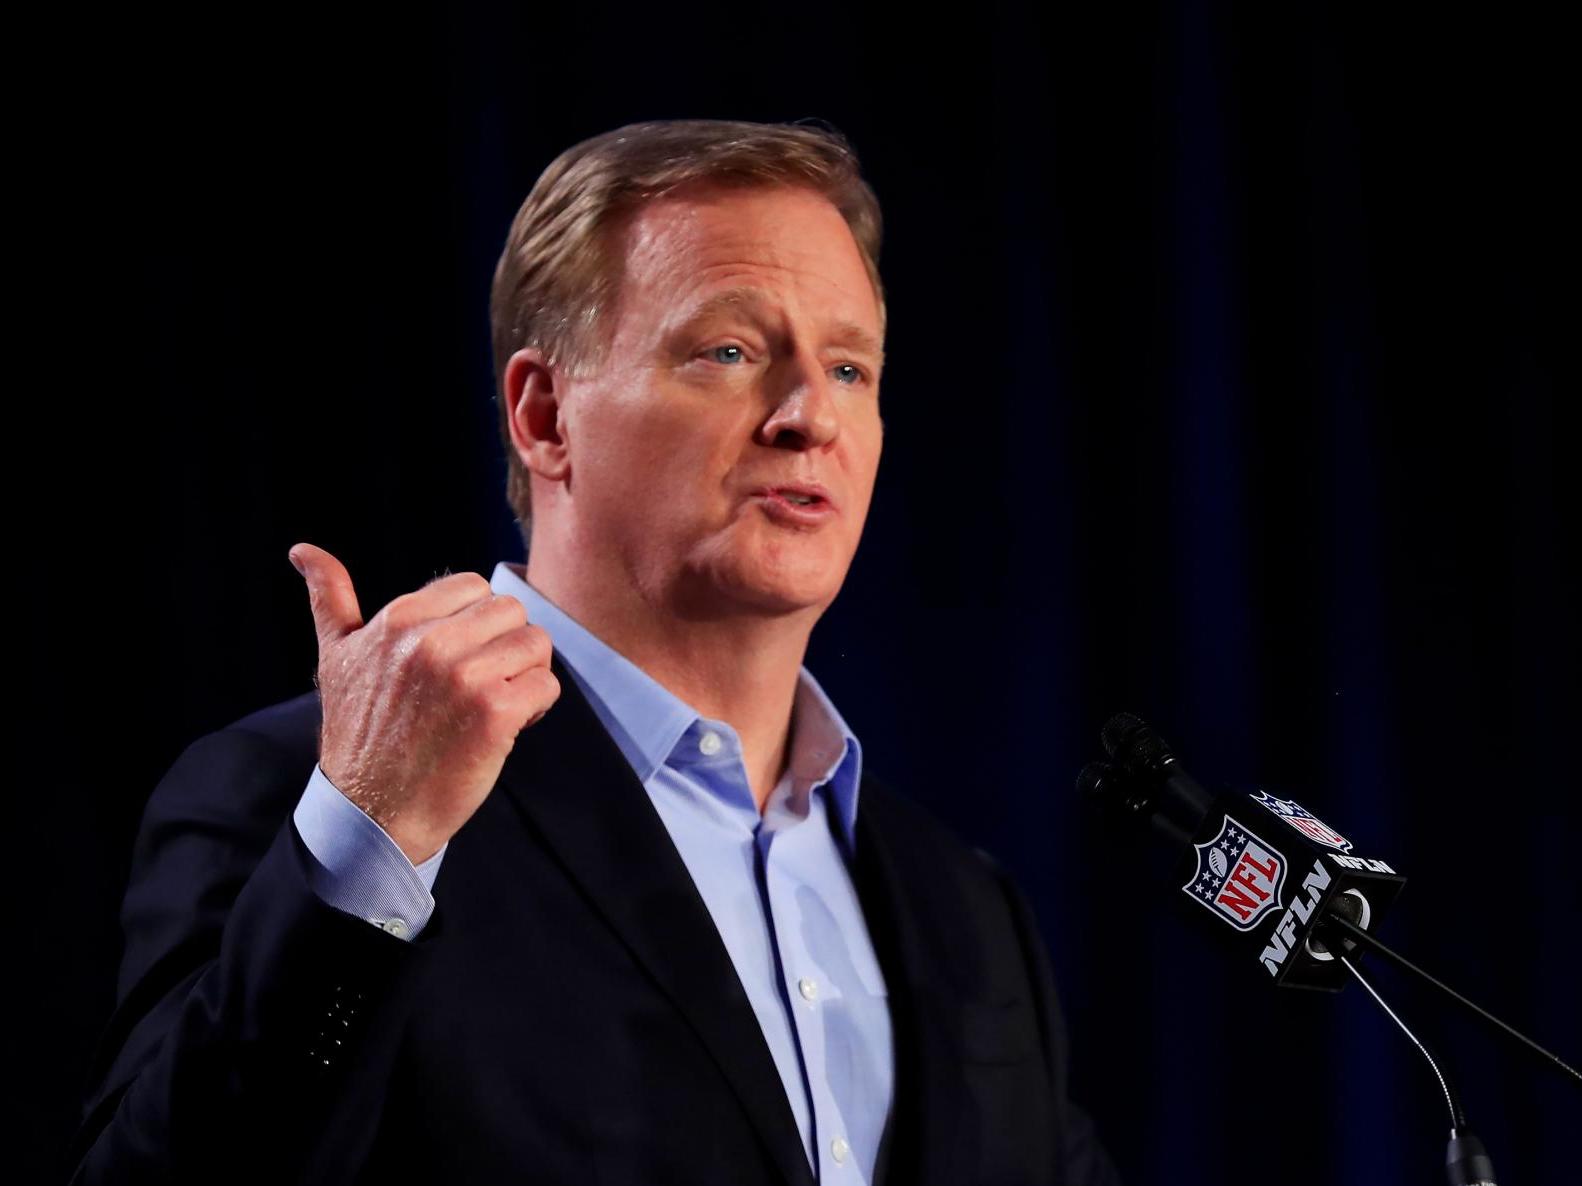 Roger Goodell has come under criticism from NFL players